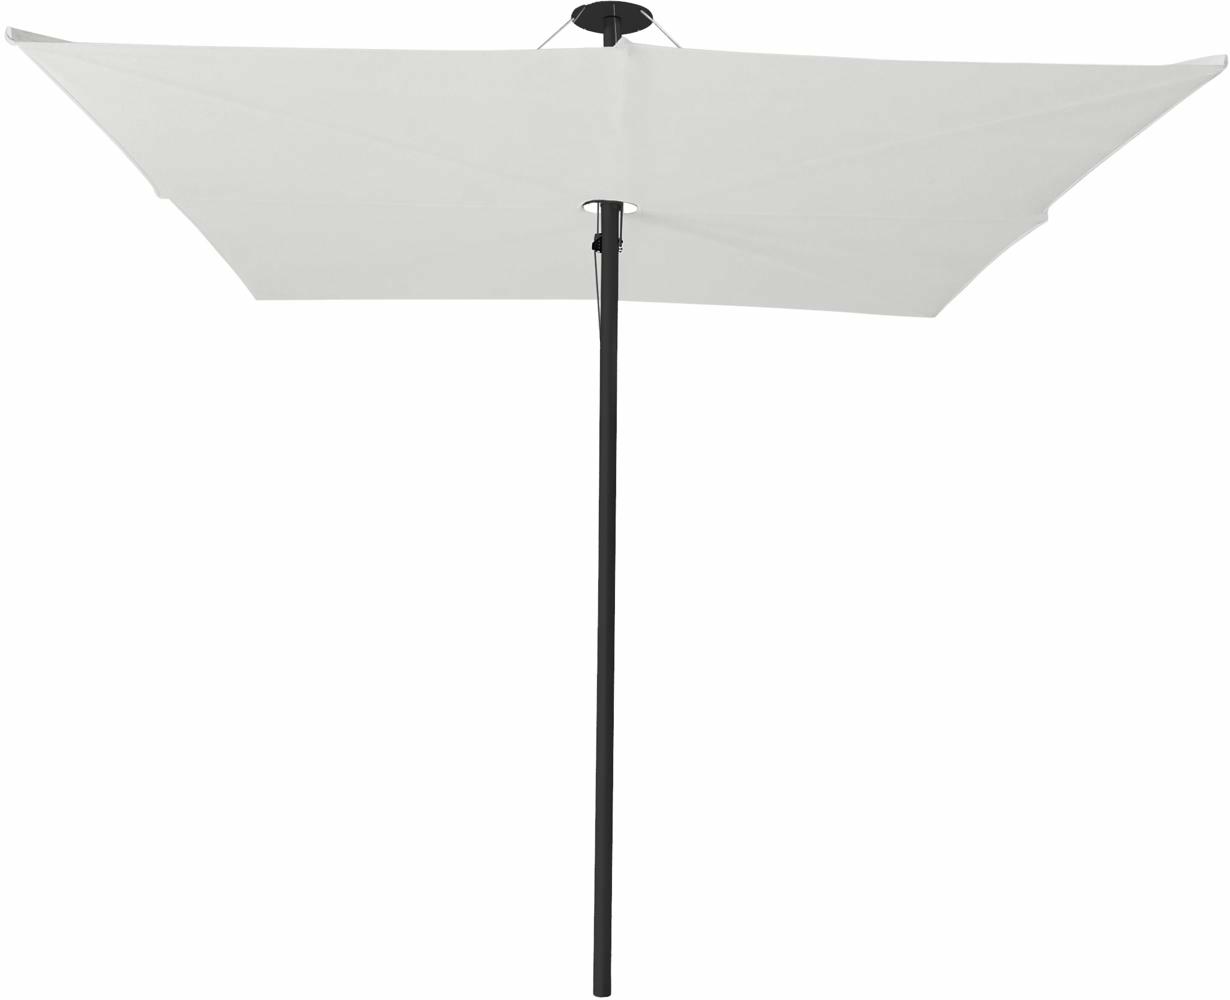 Infina center post umbrella, 3 m square, with frame in Dusk and Solidum Canvas canopy. 